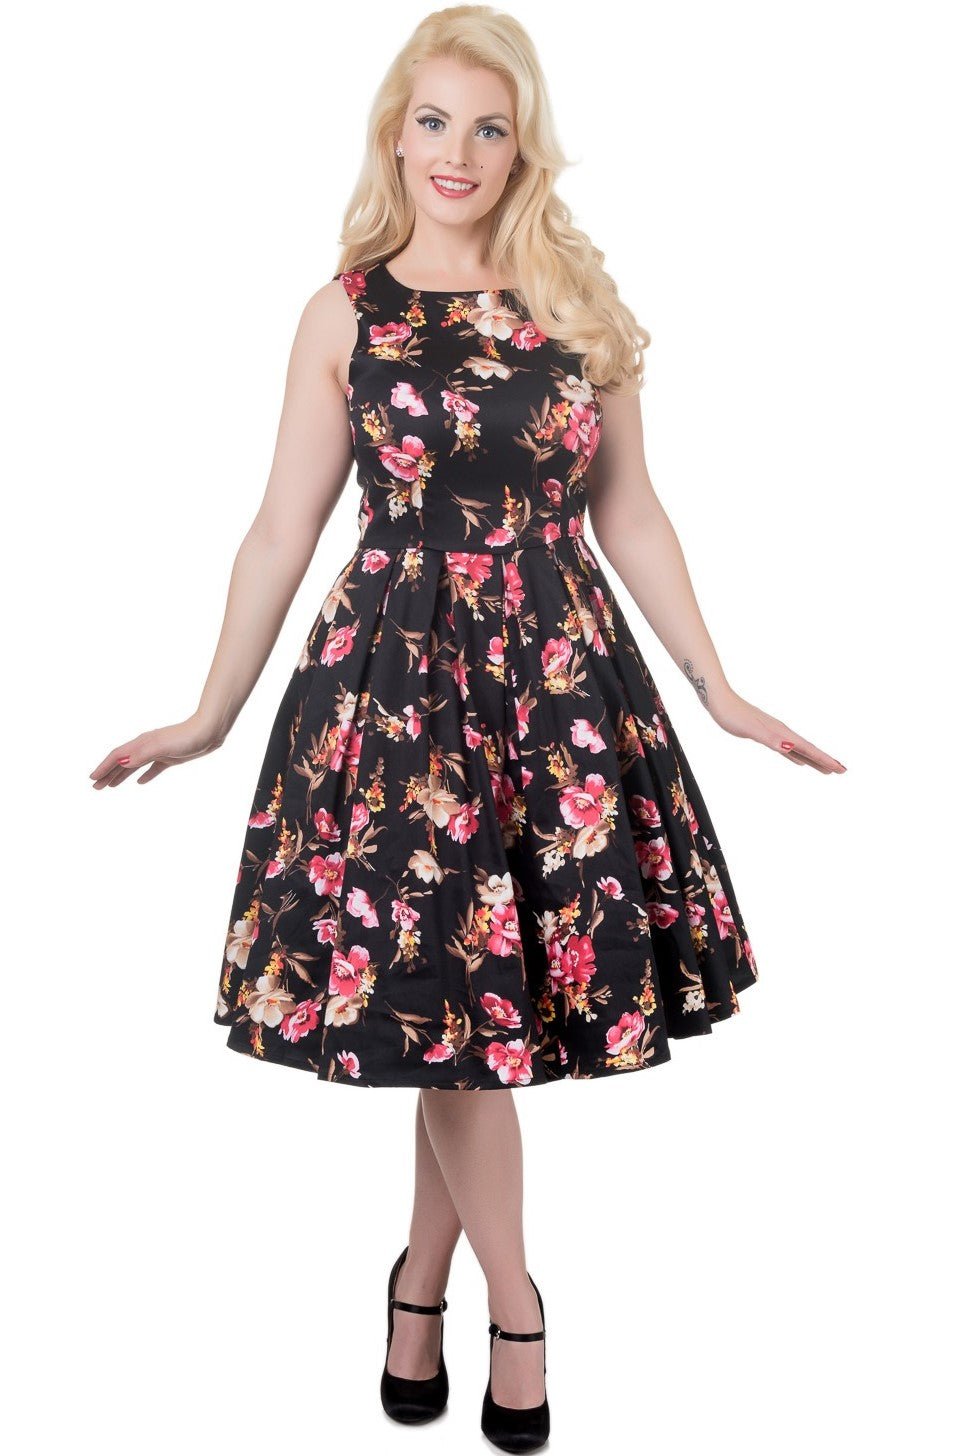 Model wearing our sleeveless Annie dress in black/pink floral print, front view